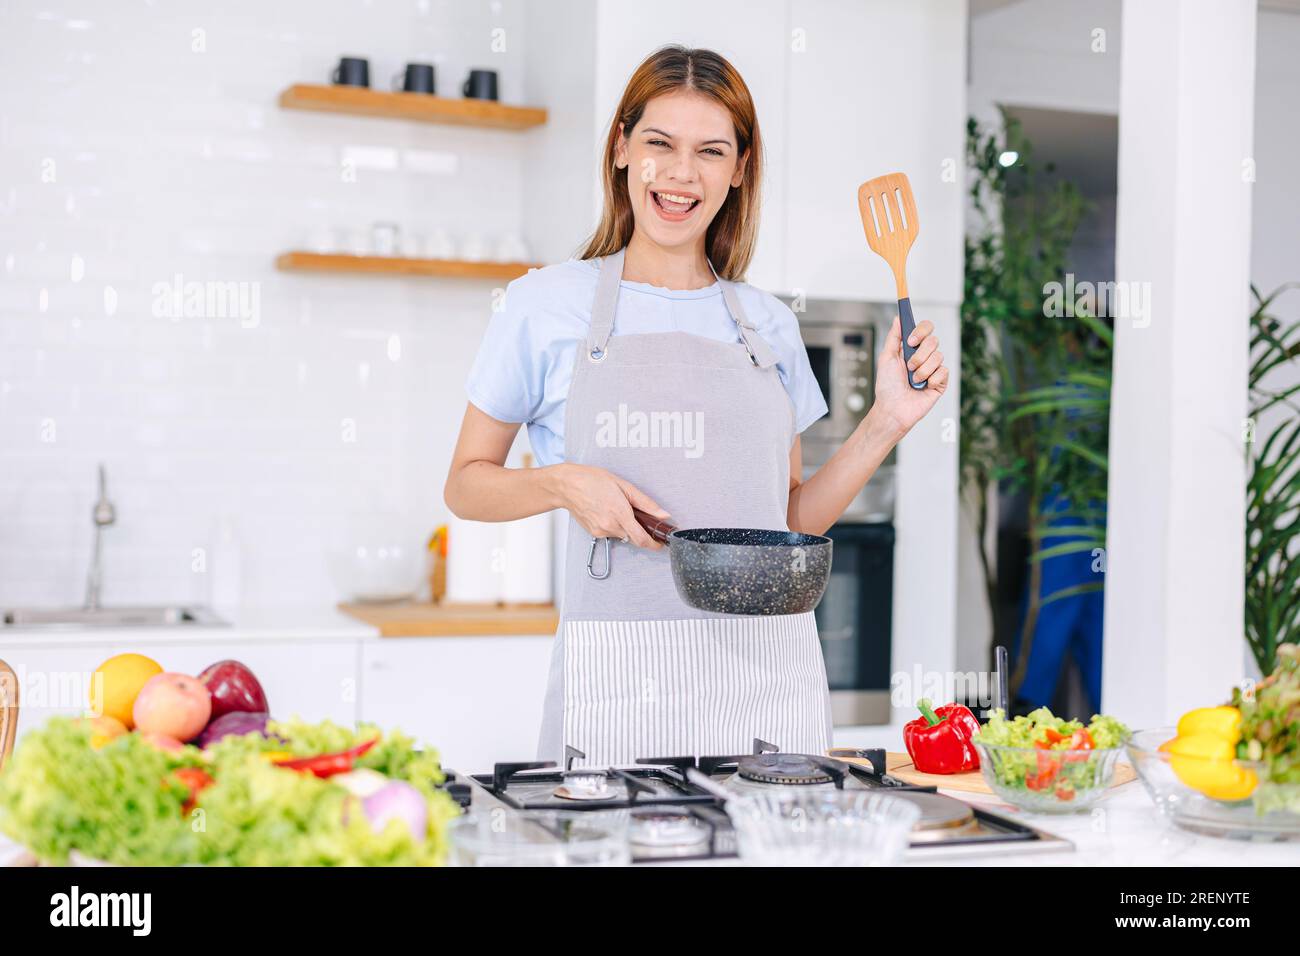 portrait happy woman cooking healthy food vegetable salad in kitchen with online tablet Stock Photo